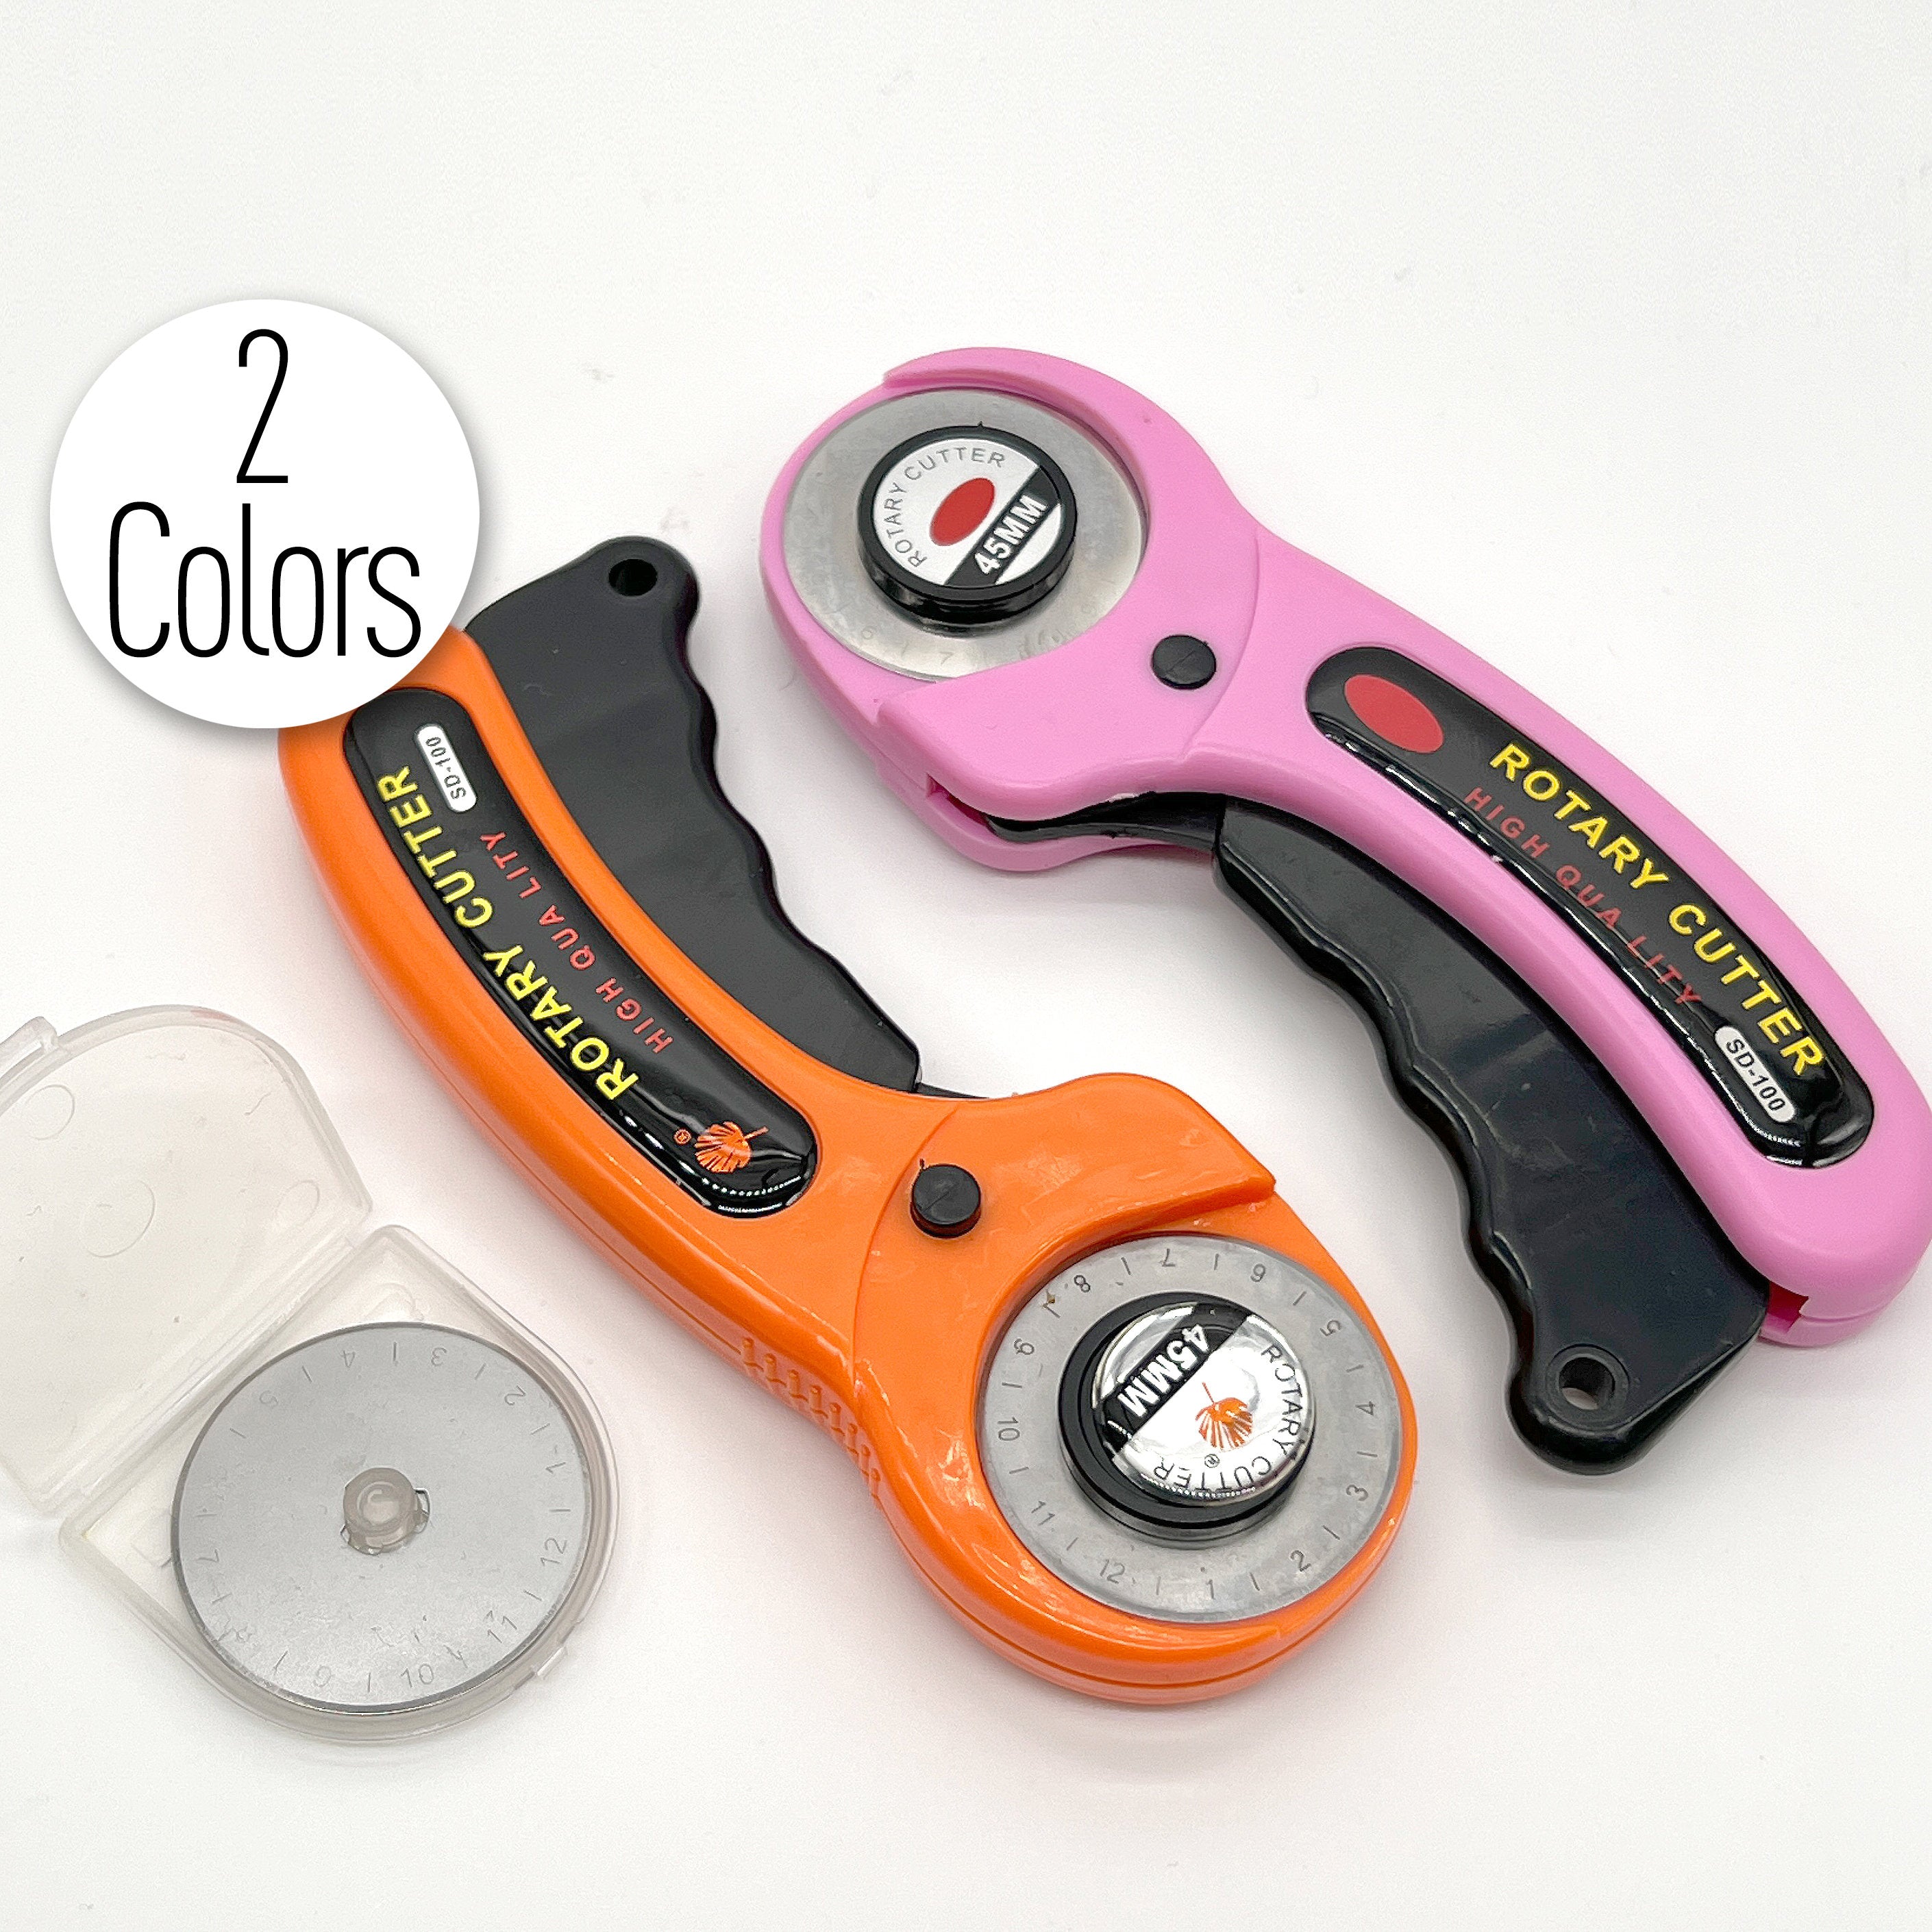 Pink 45mm Sewing & Quilting Rotary Cutter Set With Blades